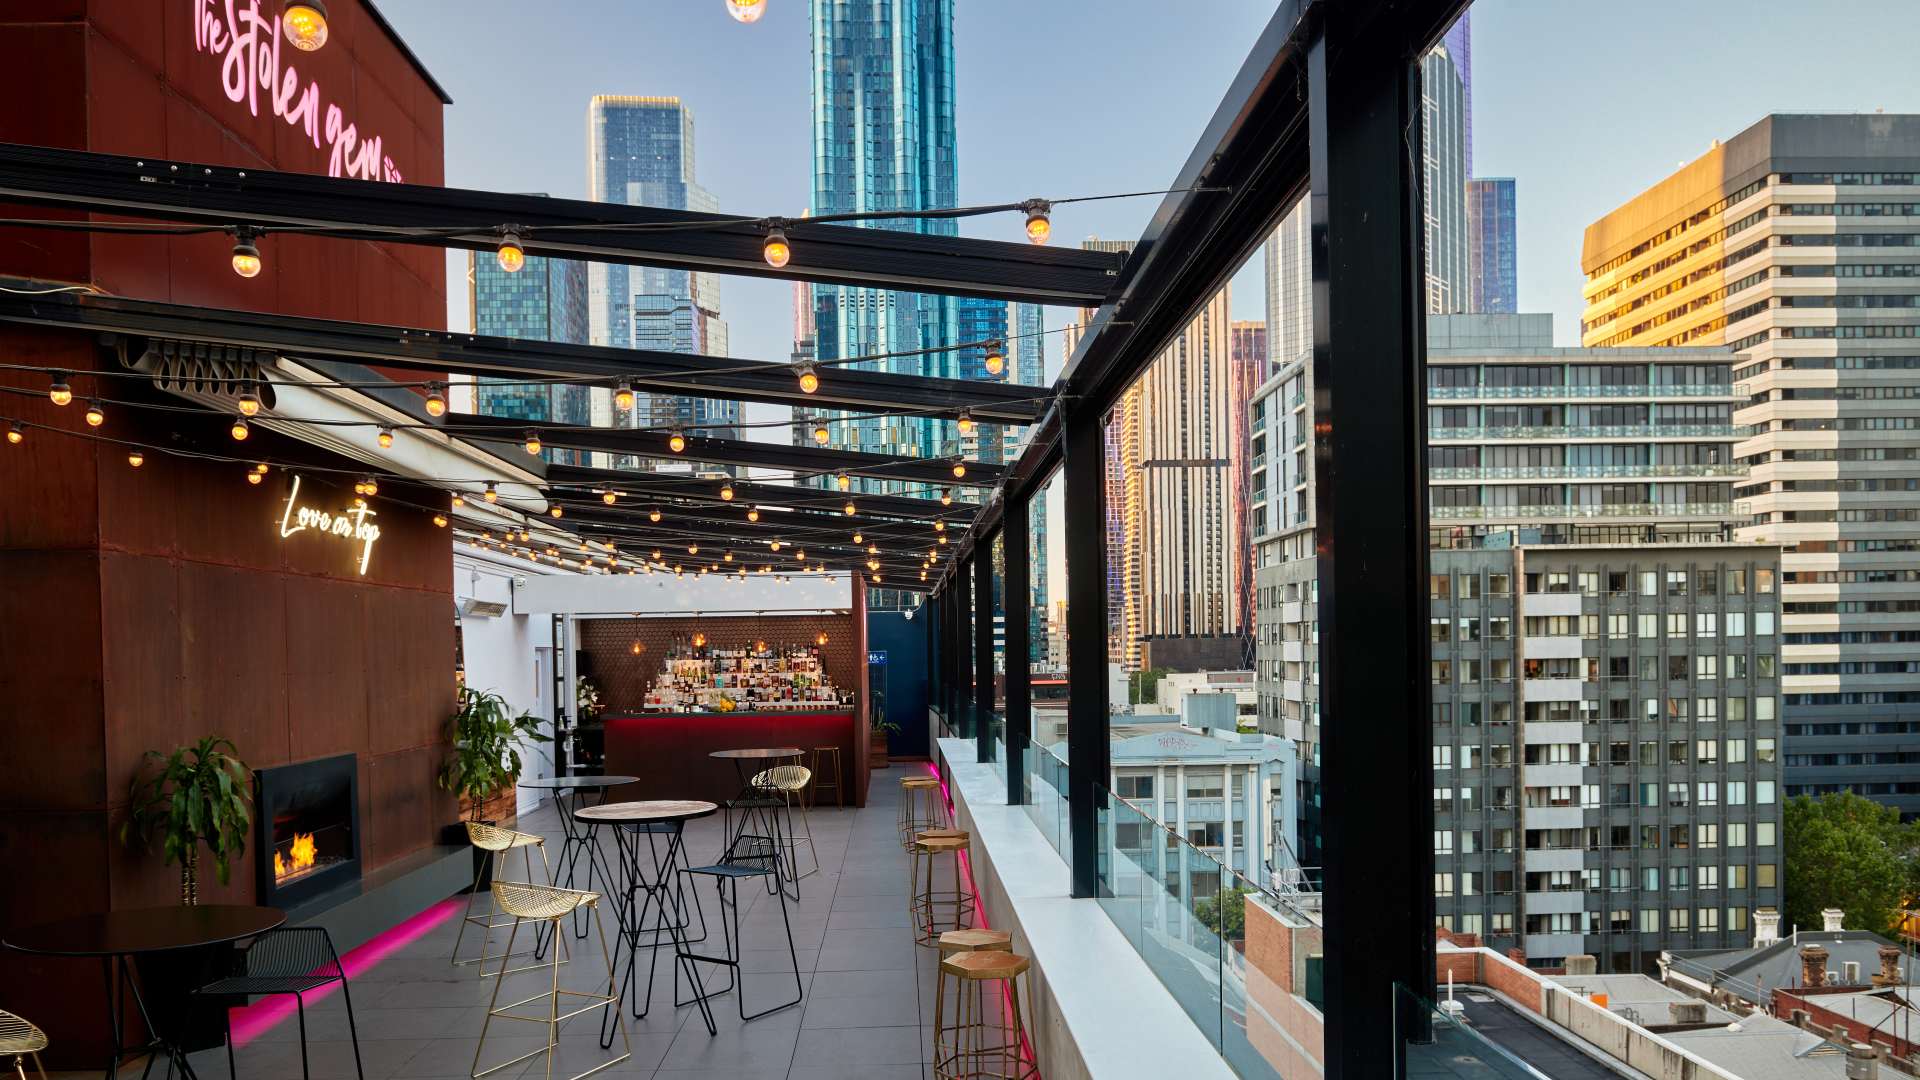 The Stolen Gem Is the CBD's New Rooftop Cocktail Bar and Terrace Opening Next Month